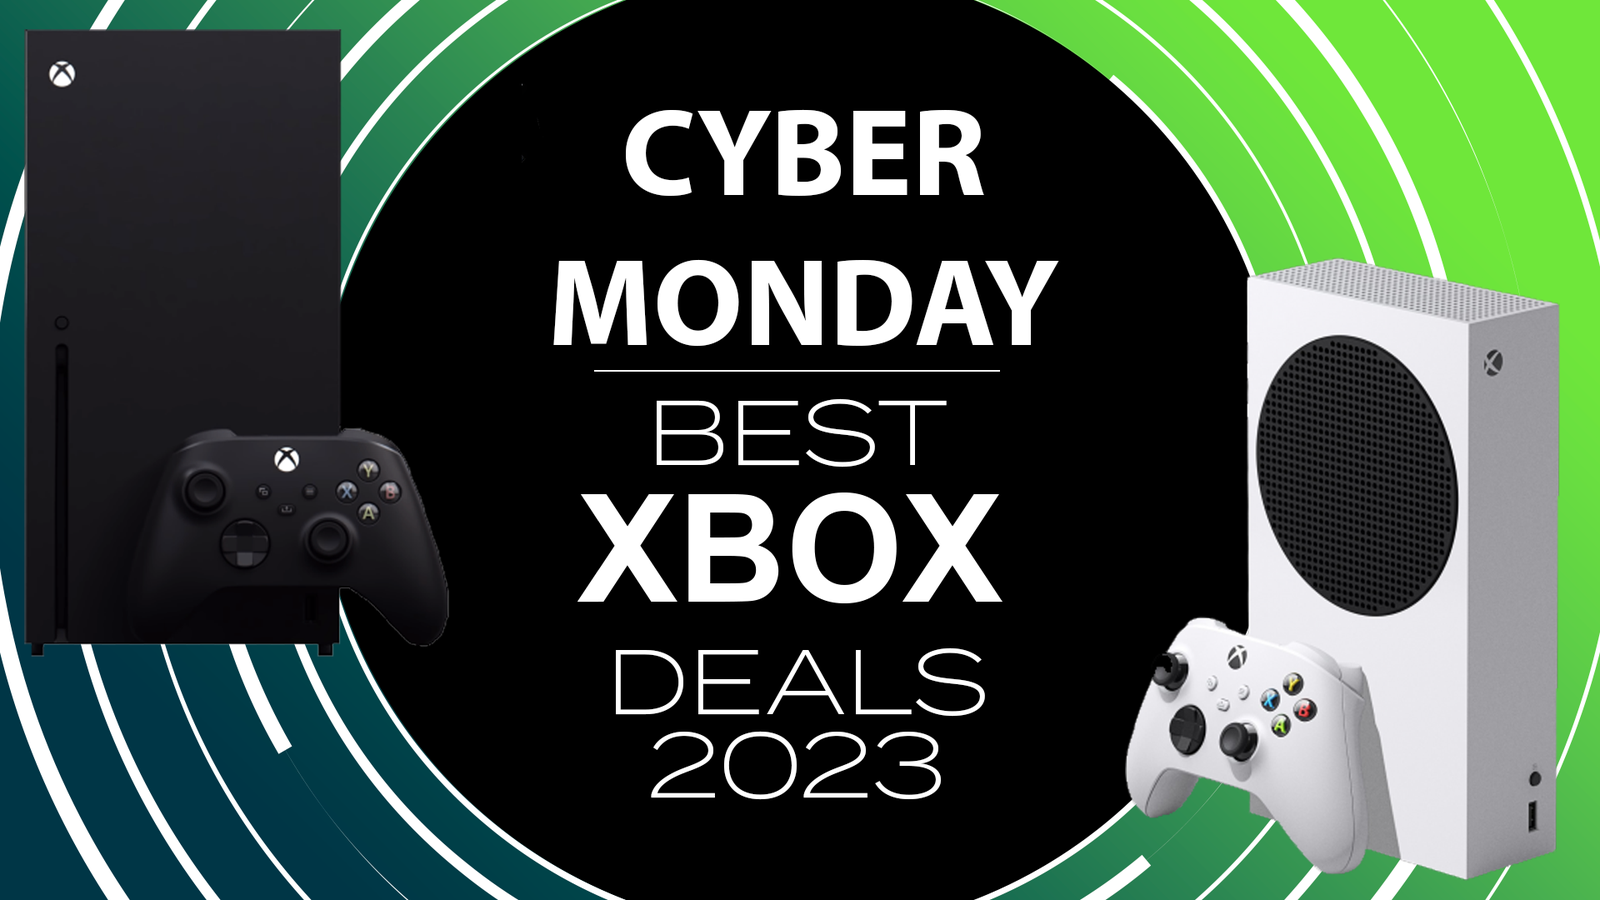 The Best Last-Minute Xbox Cyber Monday Bundle Deal Is Still Live - IGN